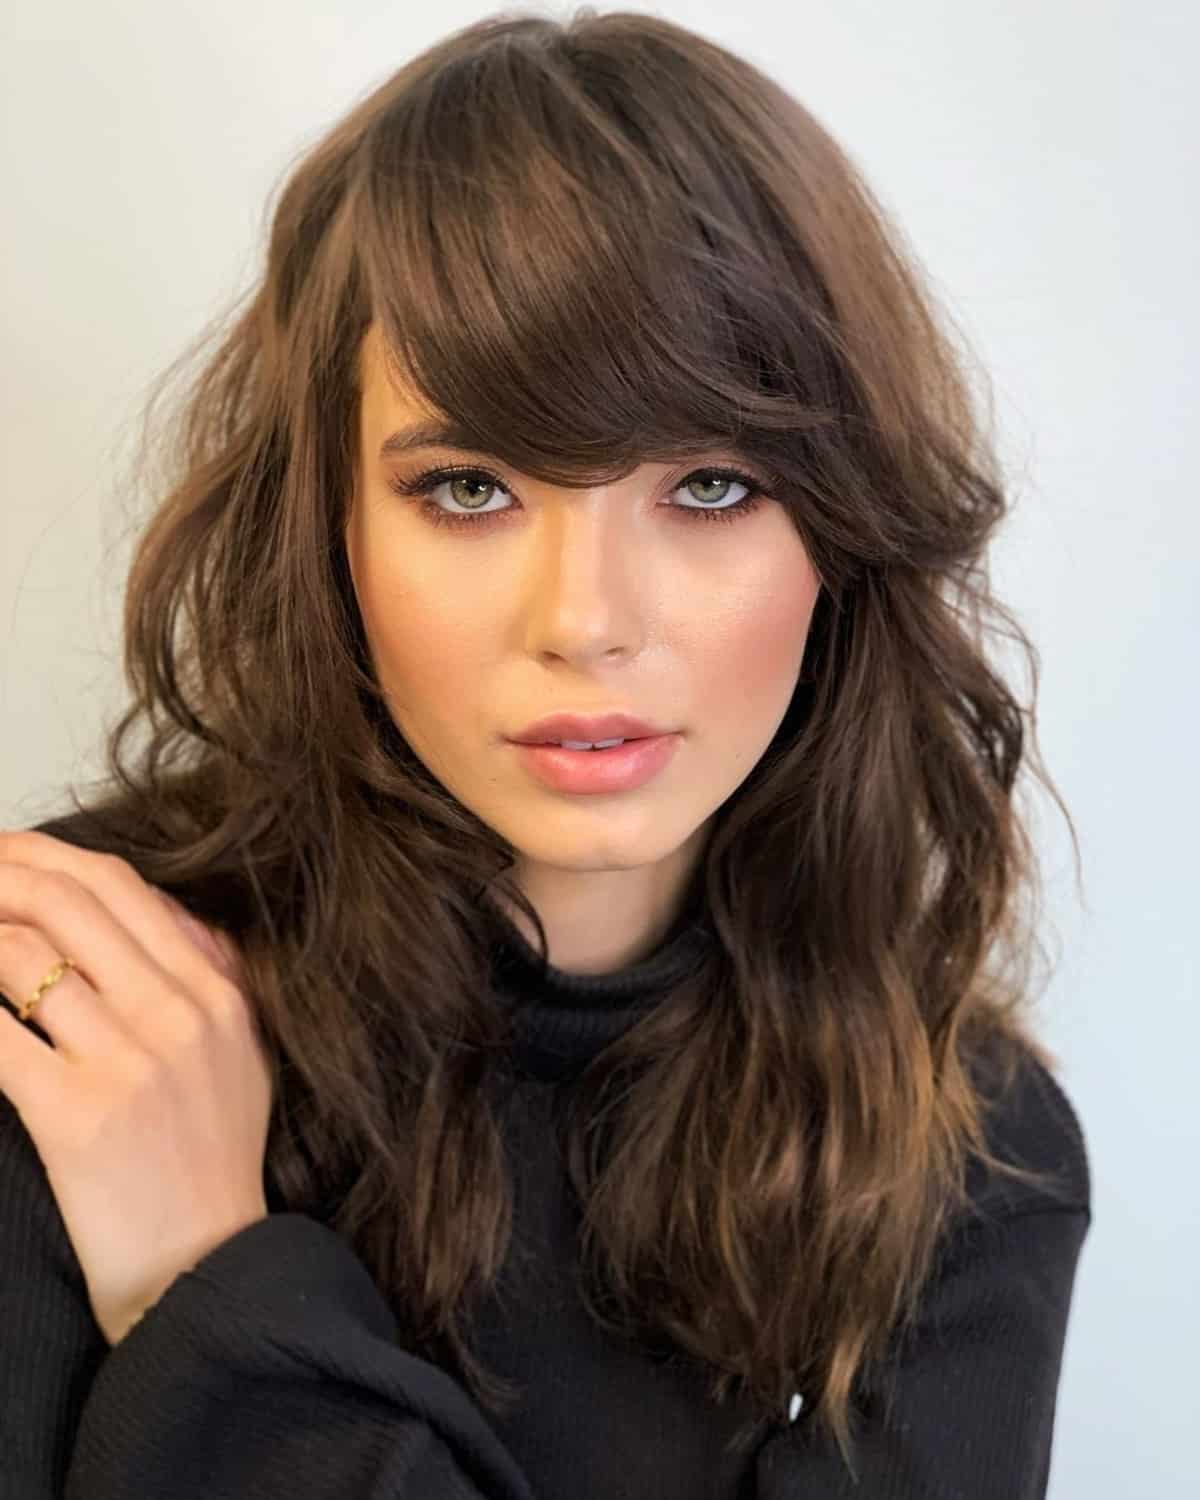 Shaggy Medium-Length Haircut with Sweeping Side Bangs for Square Faces